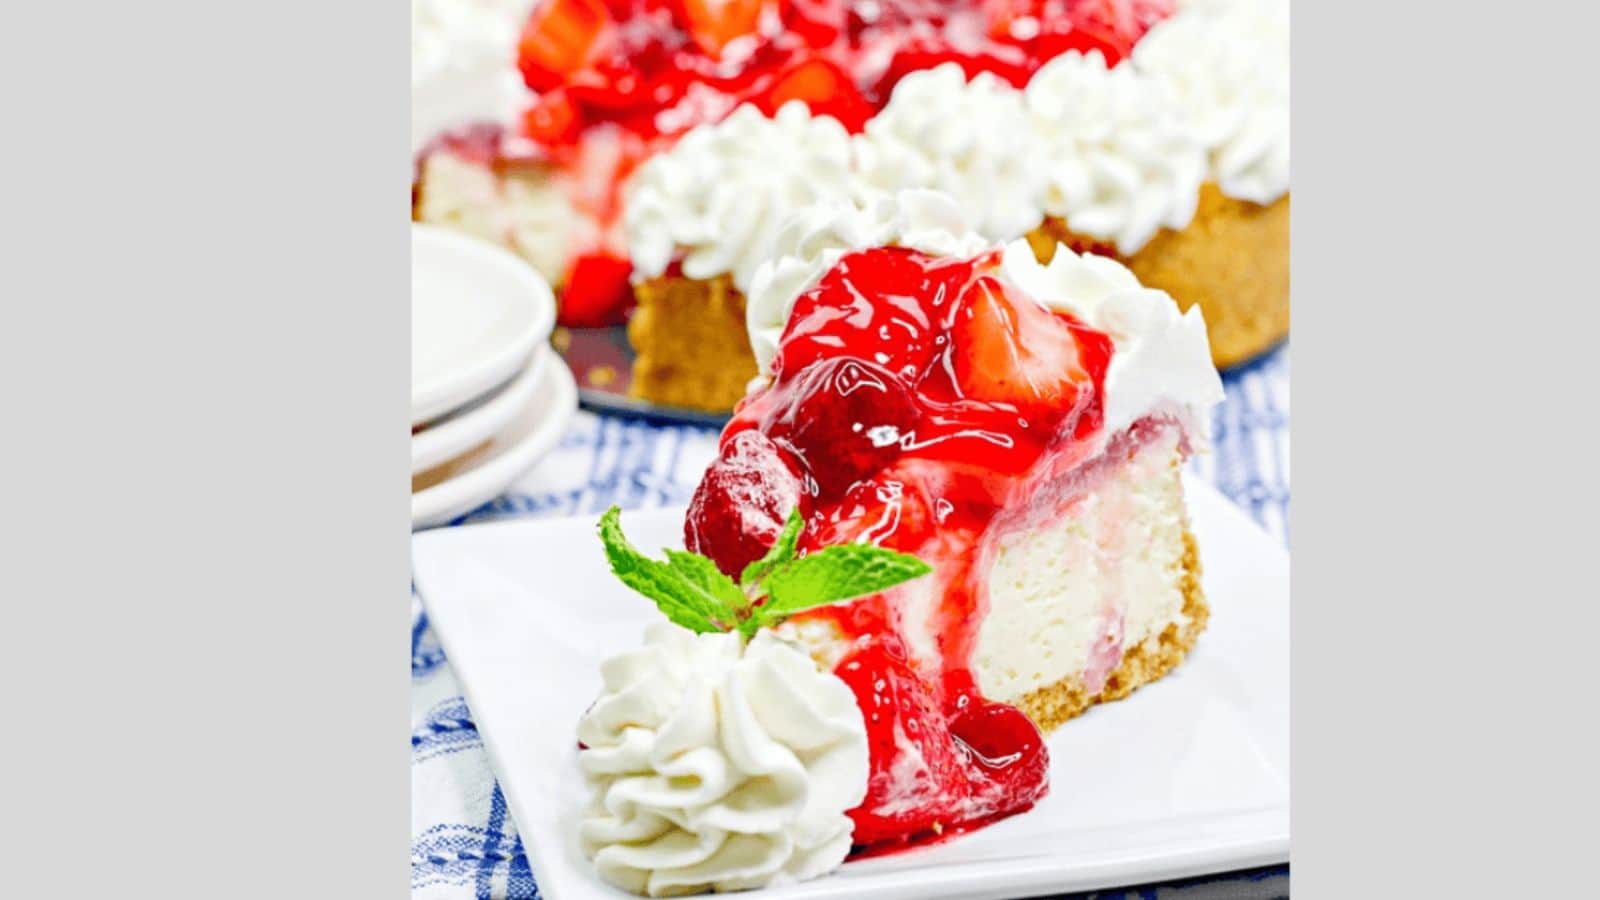 Cheesecake topped with strawberries and whipped cream.